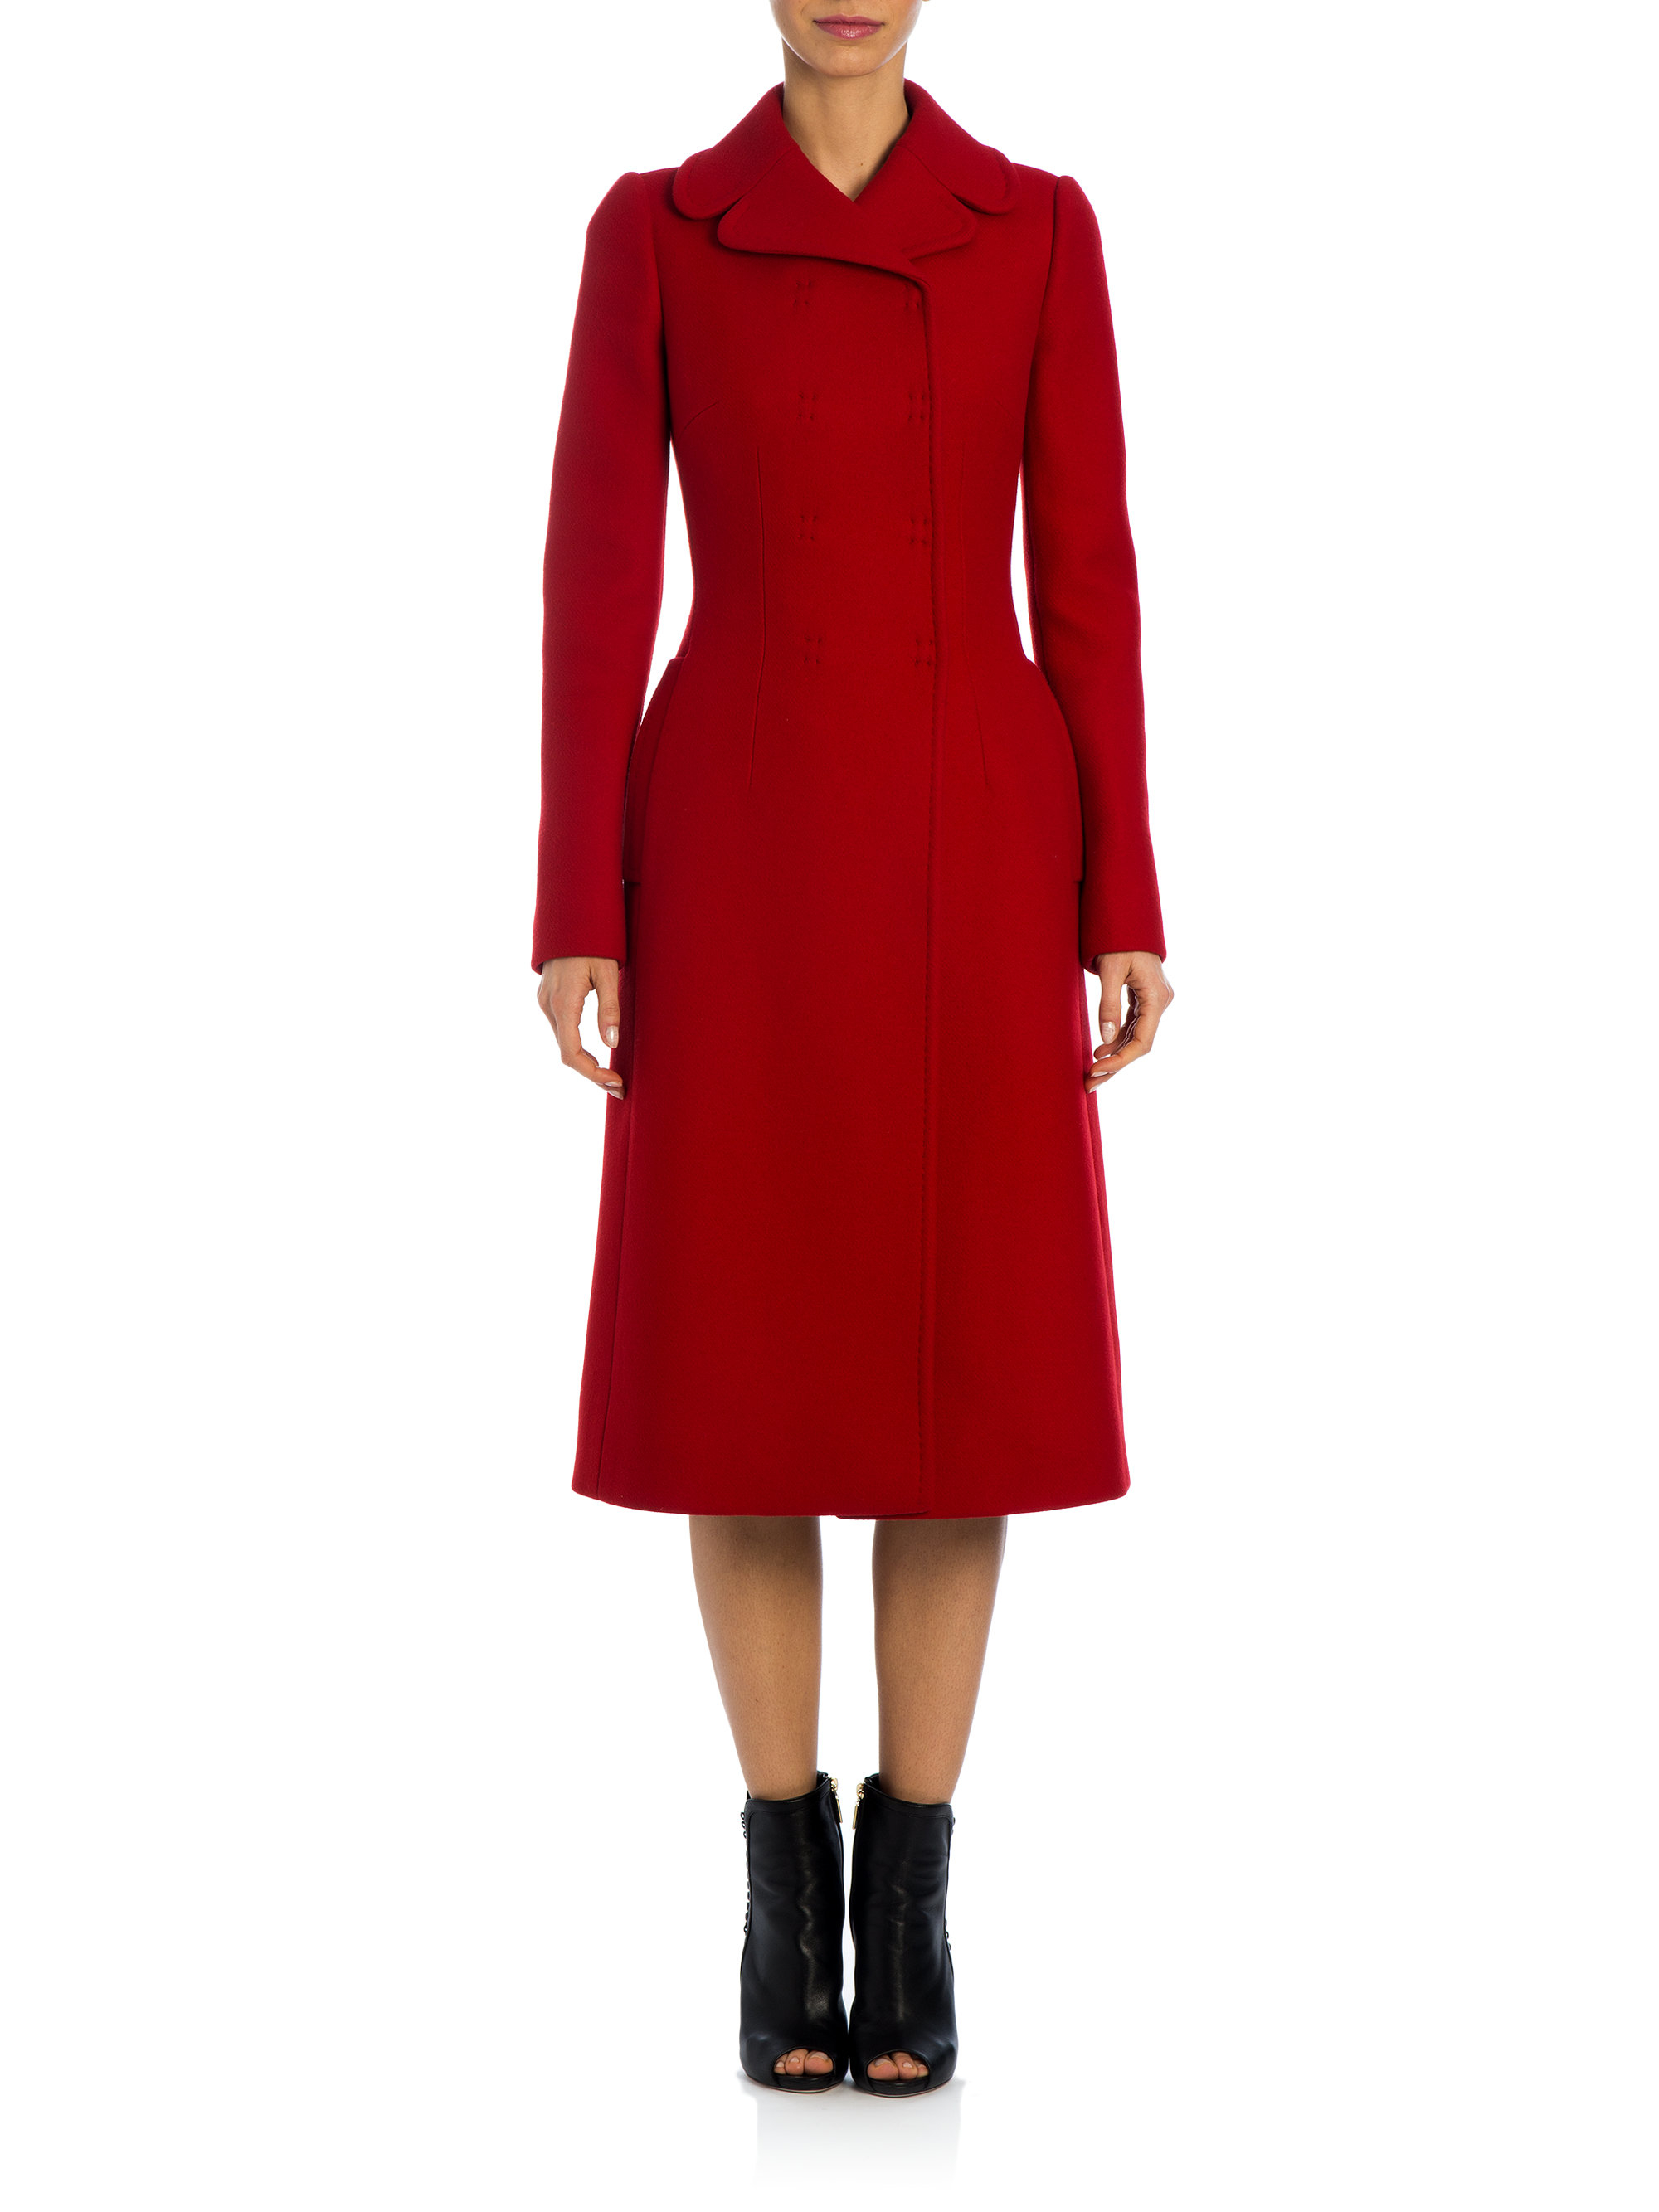 Dolce & Gabbana Long Wool-cashmere Coat in Dark Red (Red) - Lyst